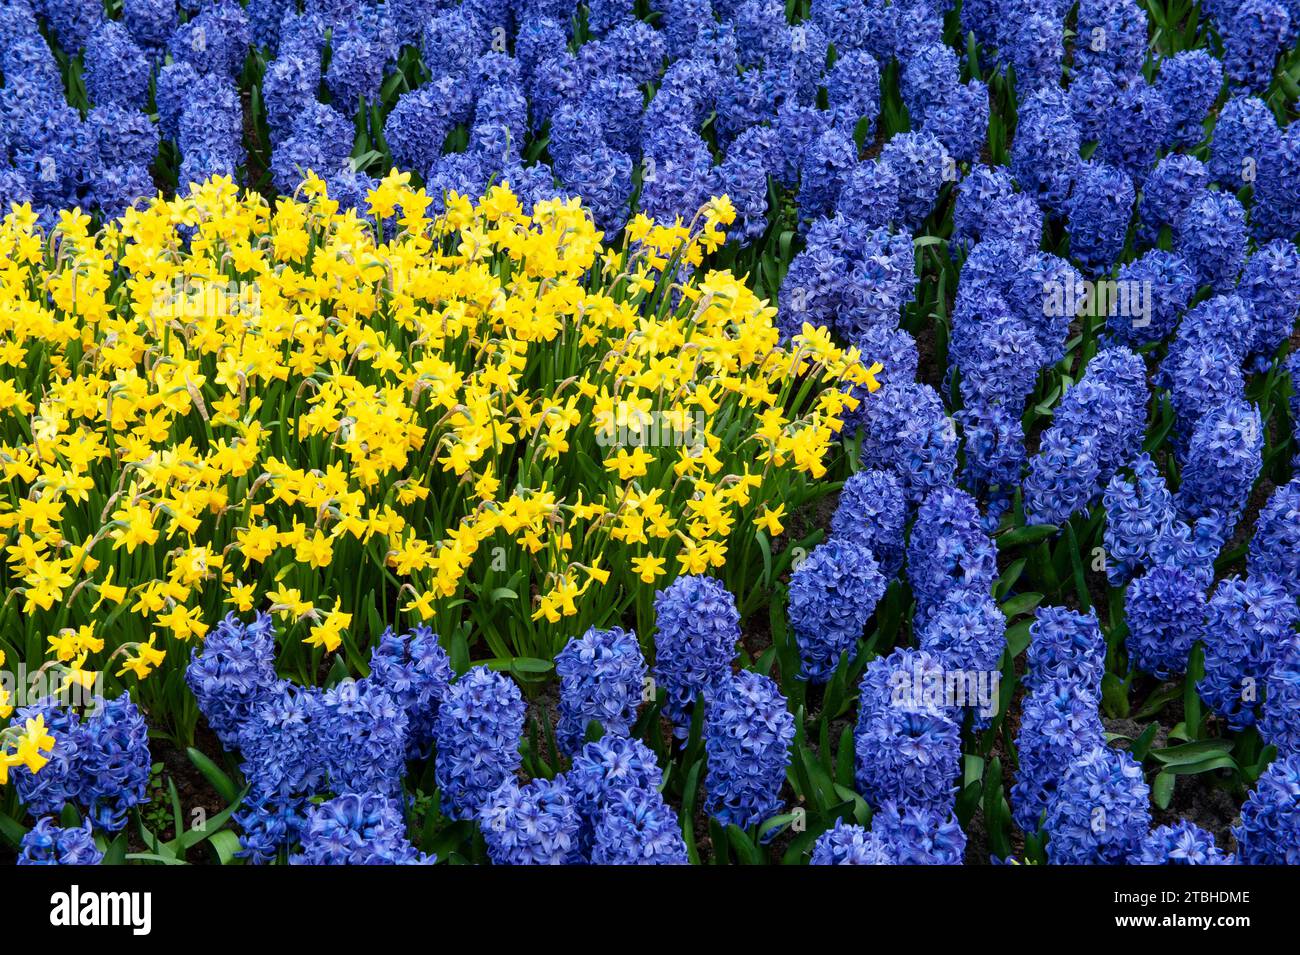 A section of the colorful and immaculately landscaped tulip and flower Keukenhof Gardens in Lisse, Netherlands. Stock Photo